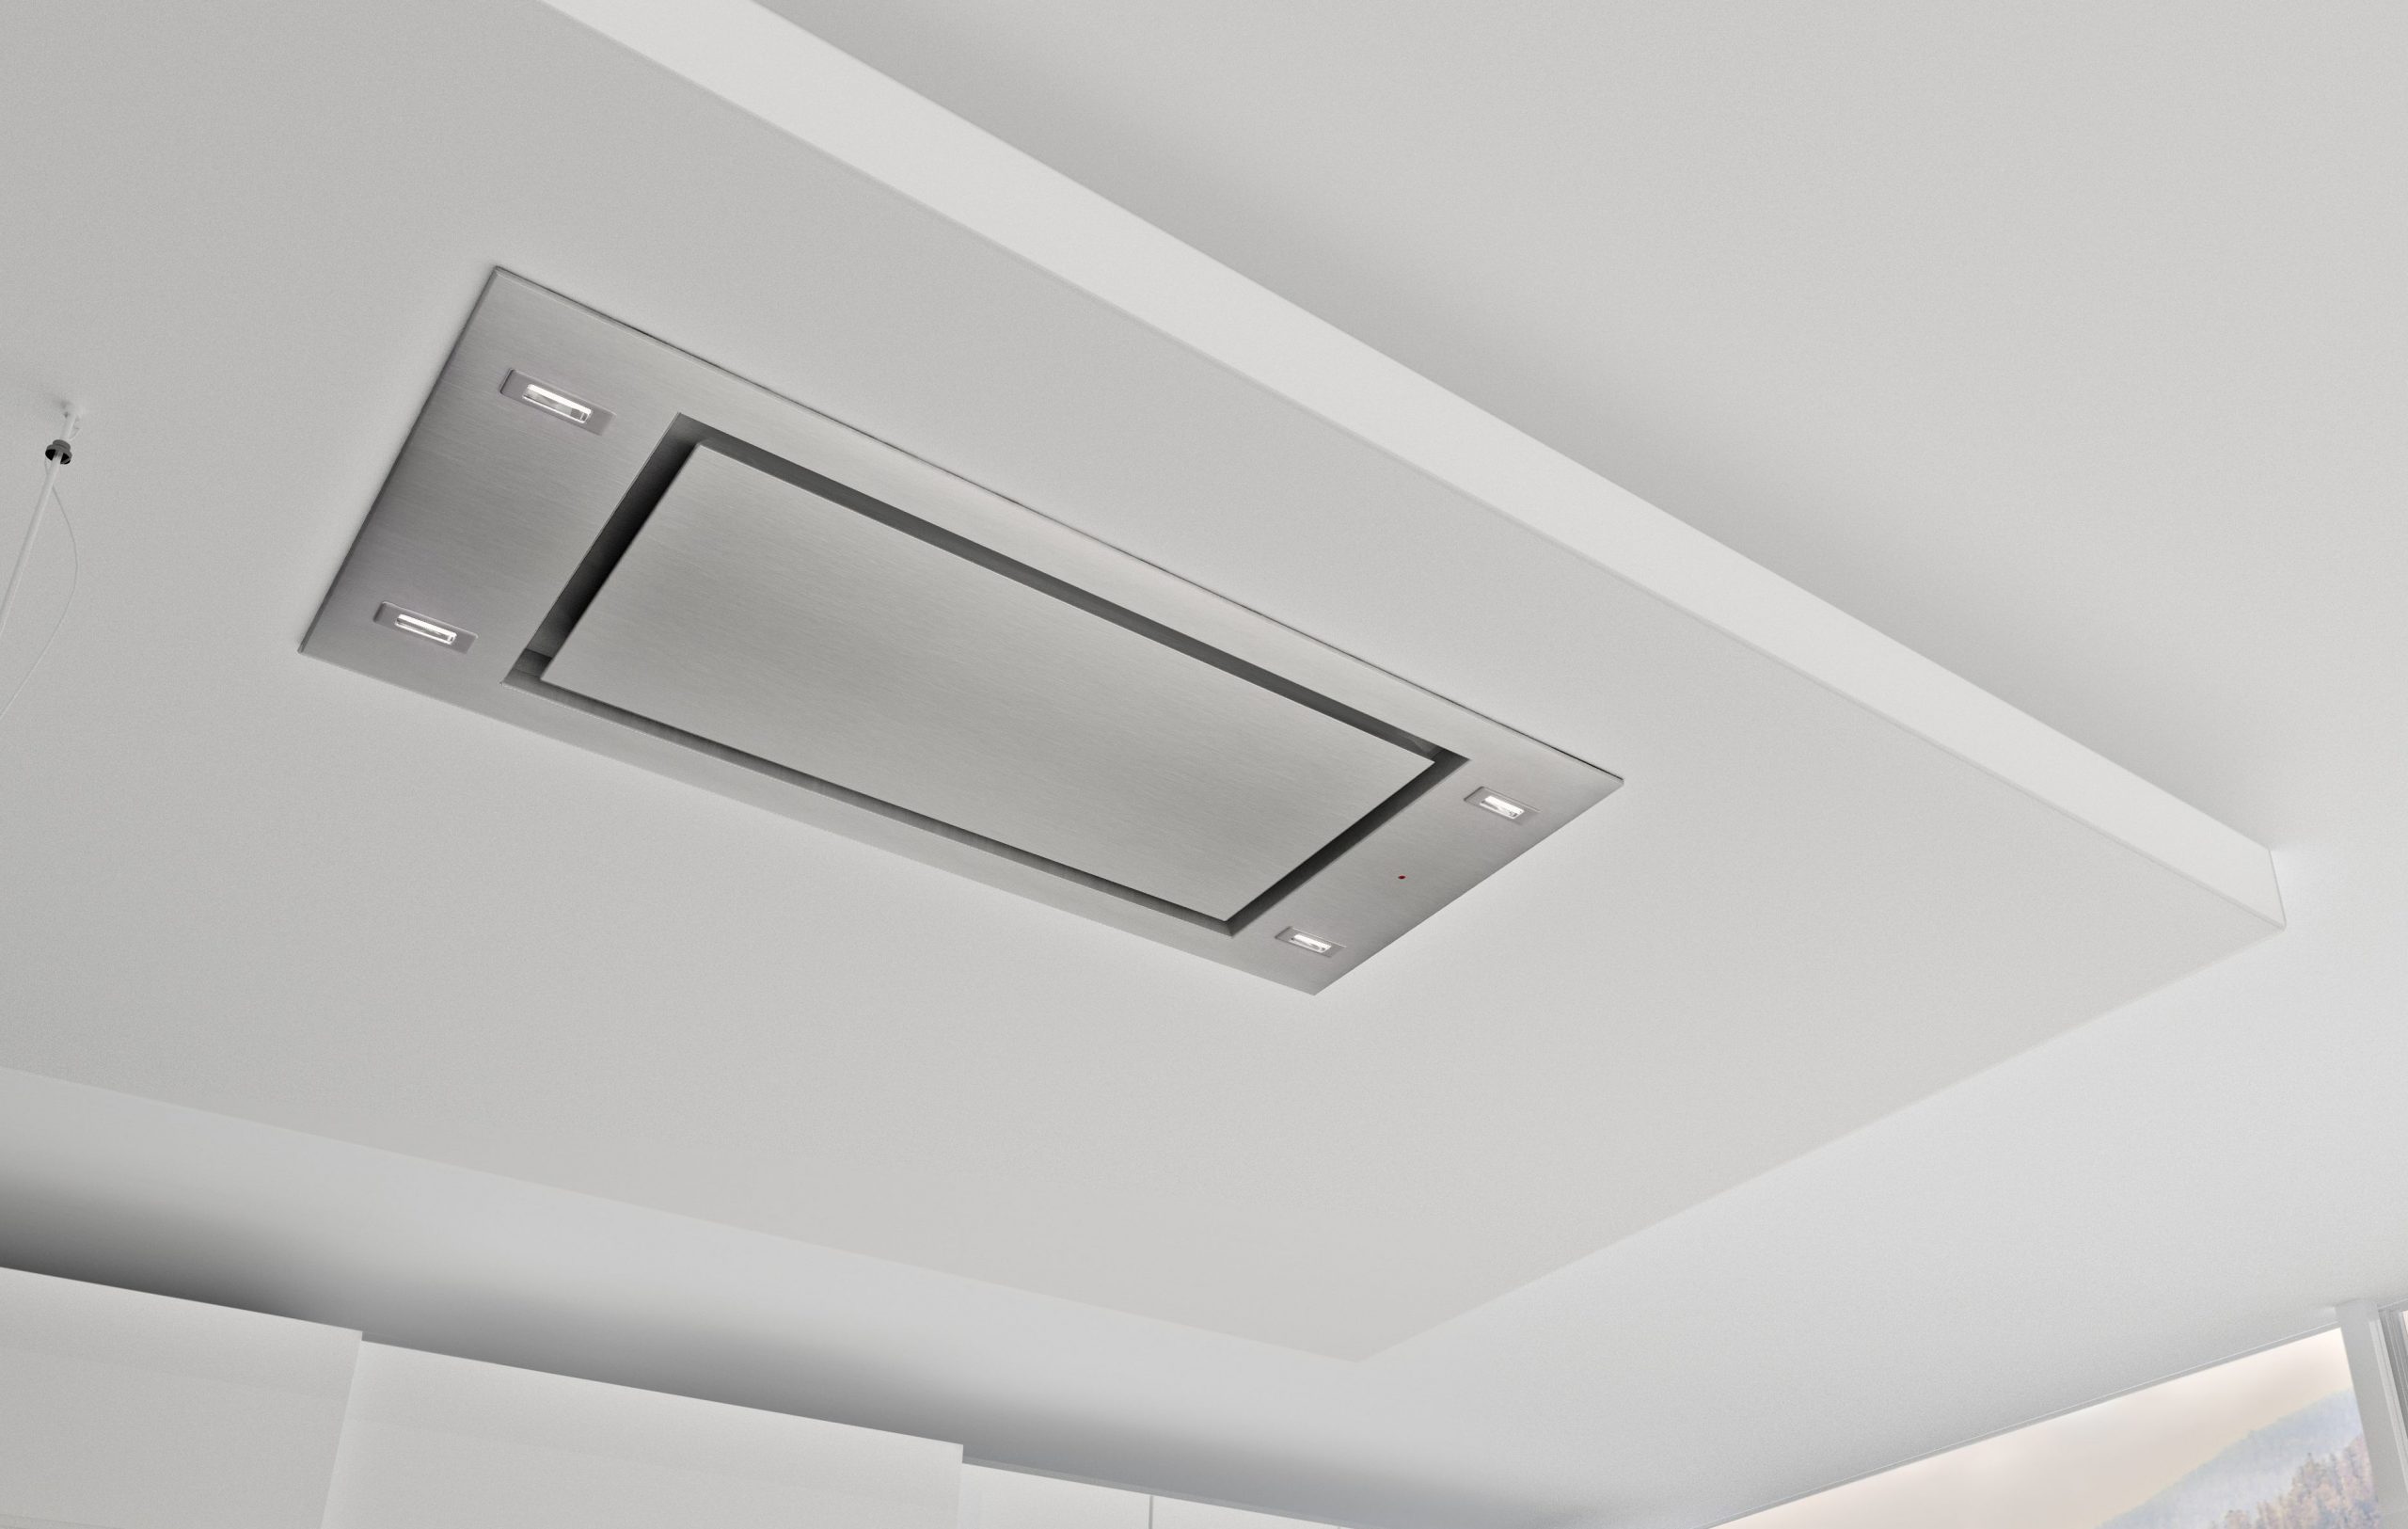 Ceiling Mounted Kitchen Exhaust Fans Residential intended for measurements 3737 X 2372